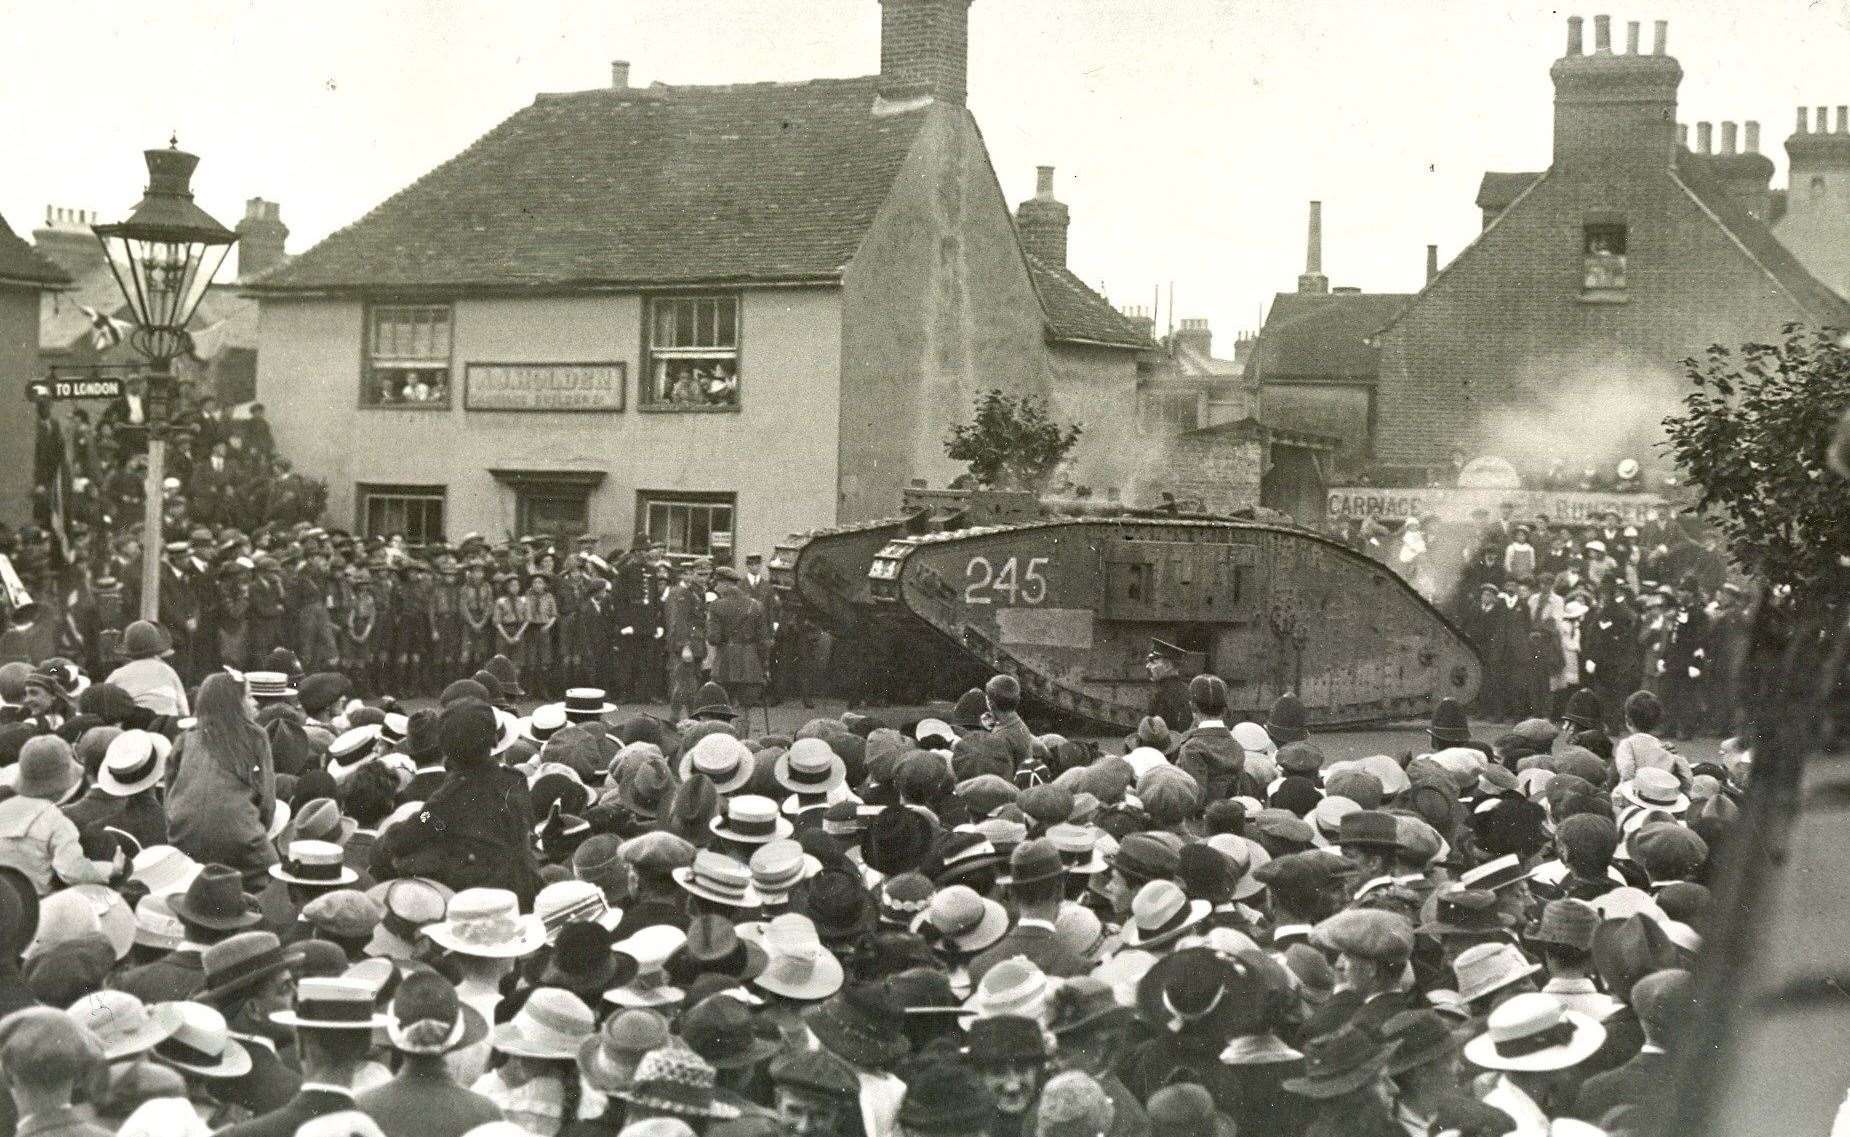 The tank was installed in 1919 following the financial contributions made by the town during the war